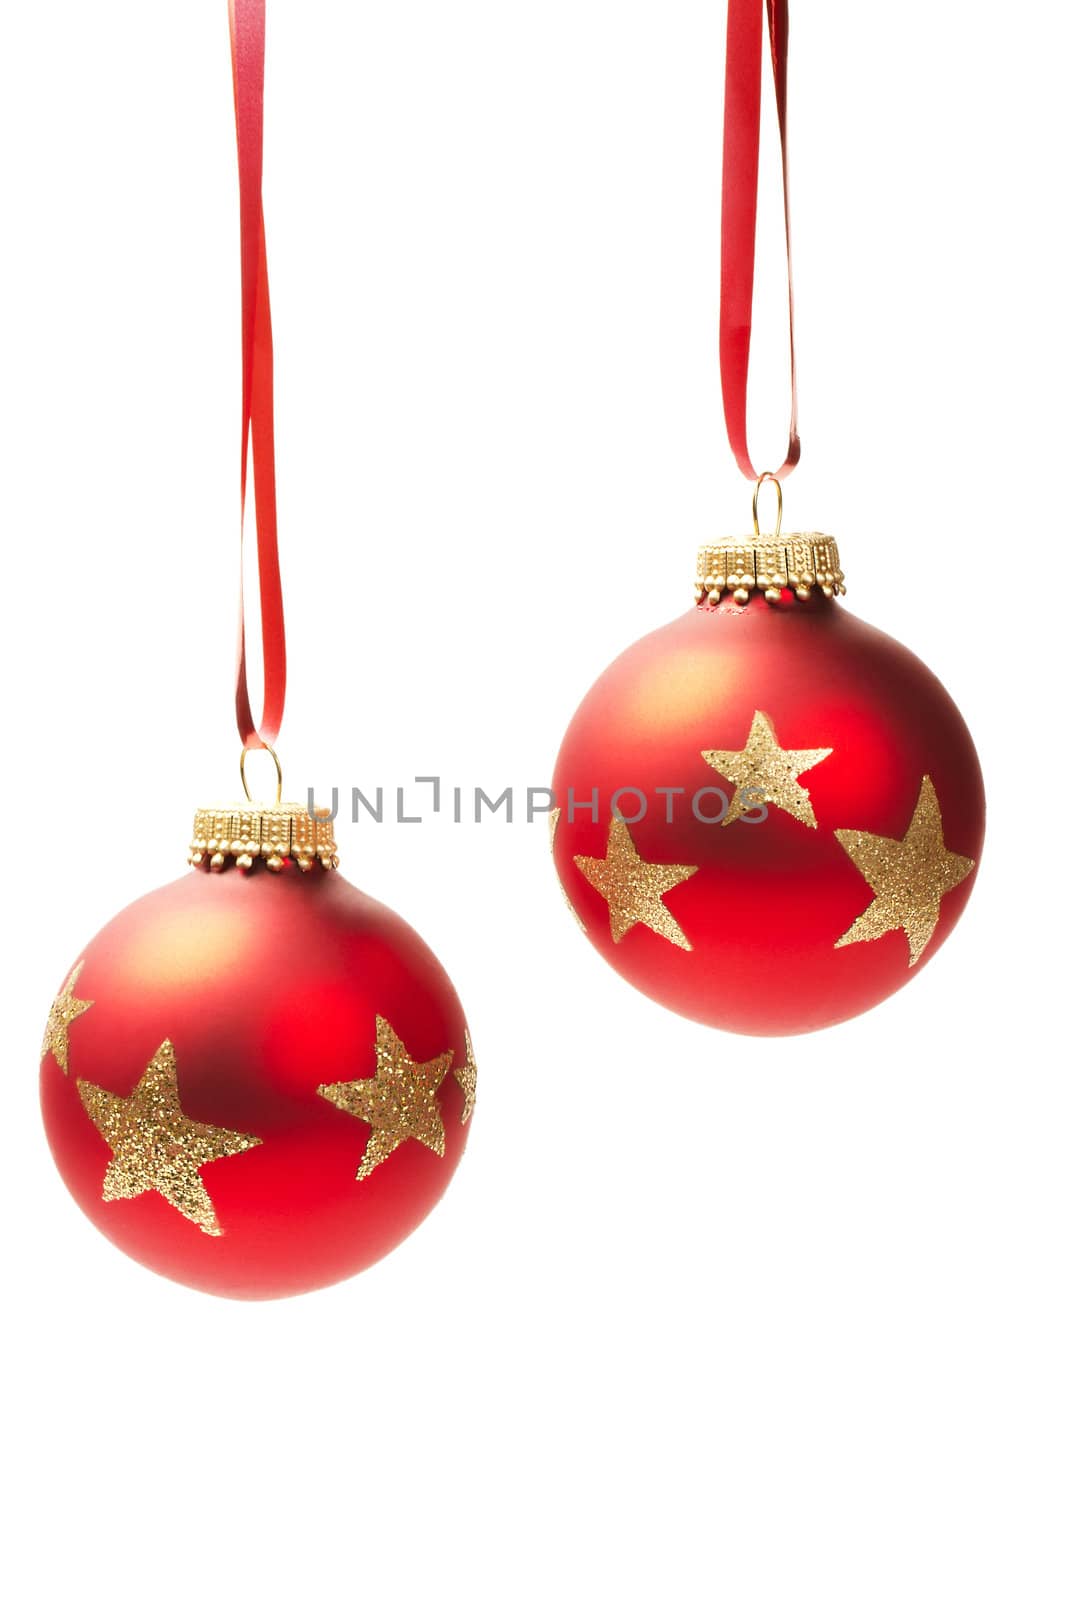 two hanging red dull christmas balls isolated on white background